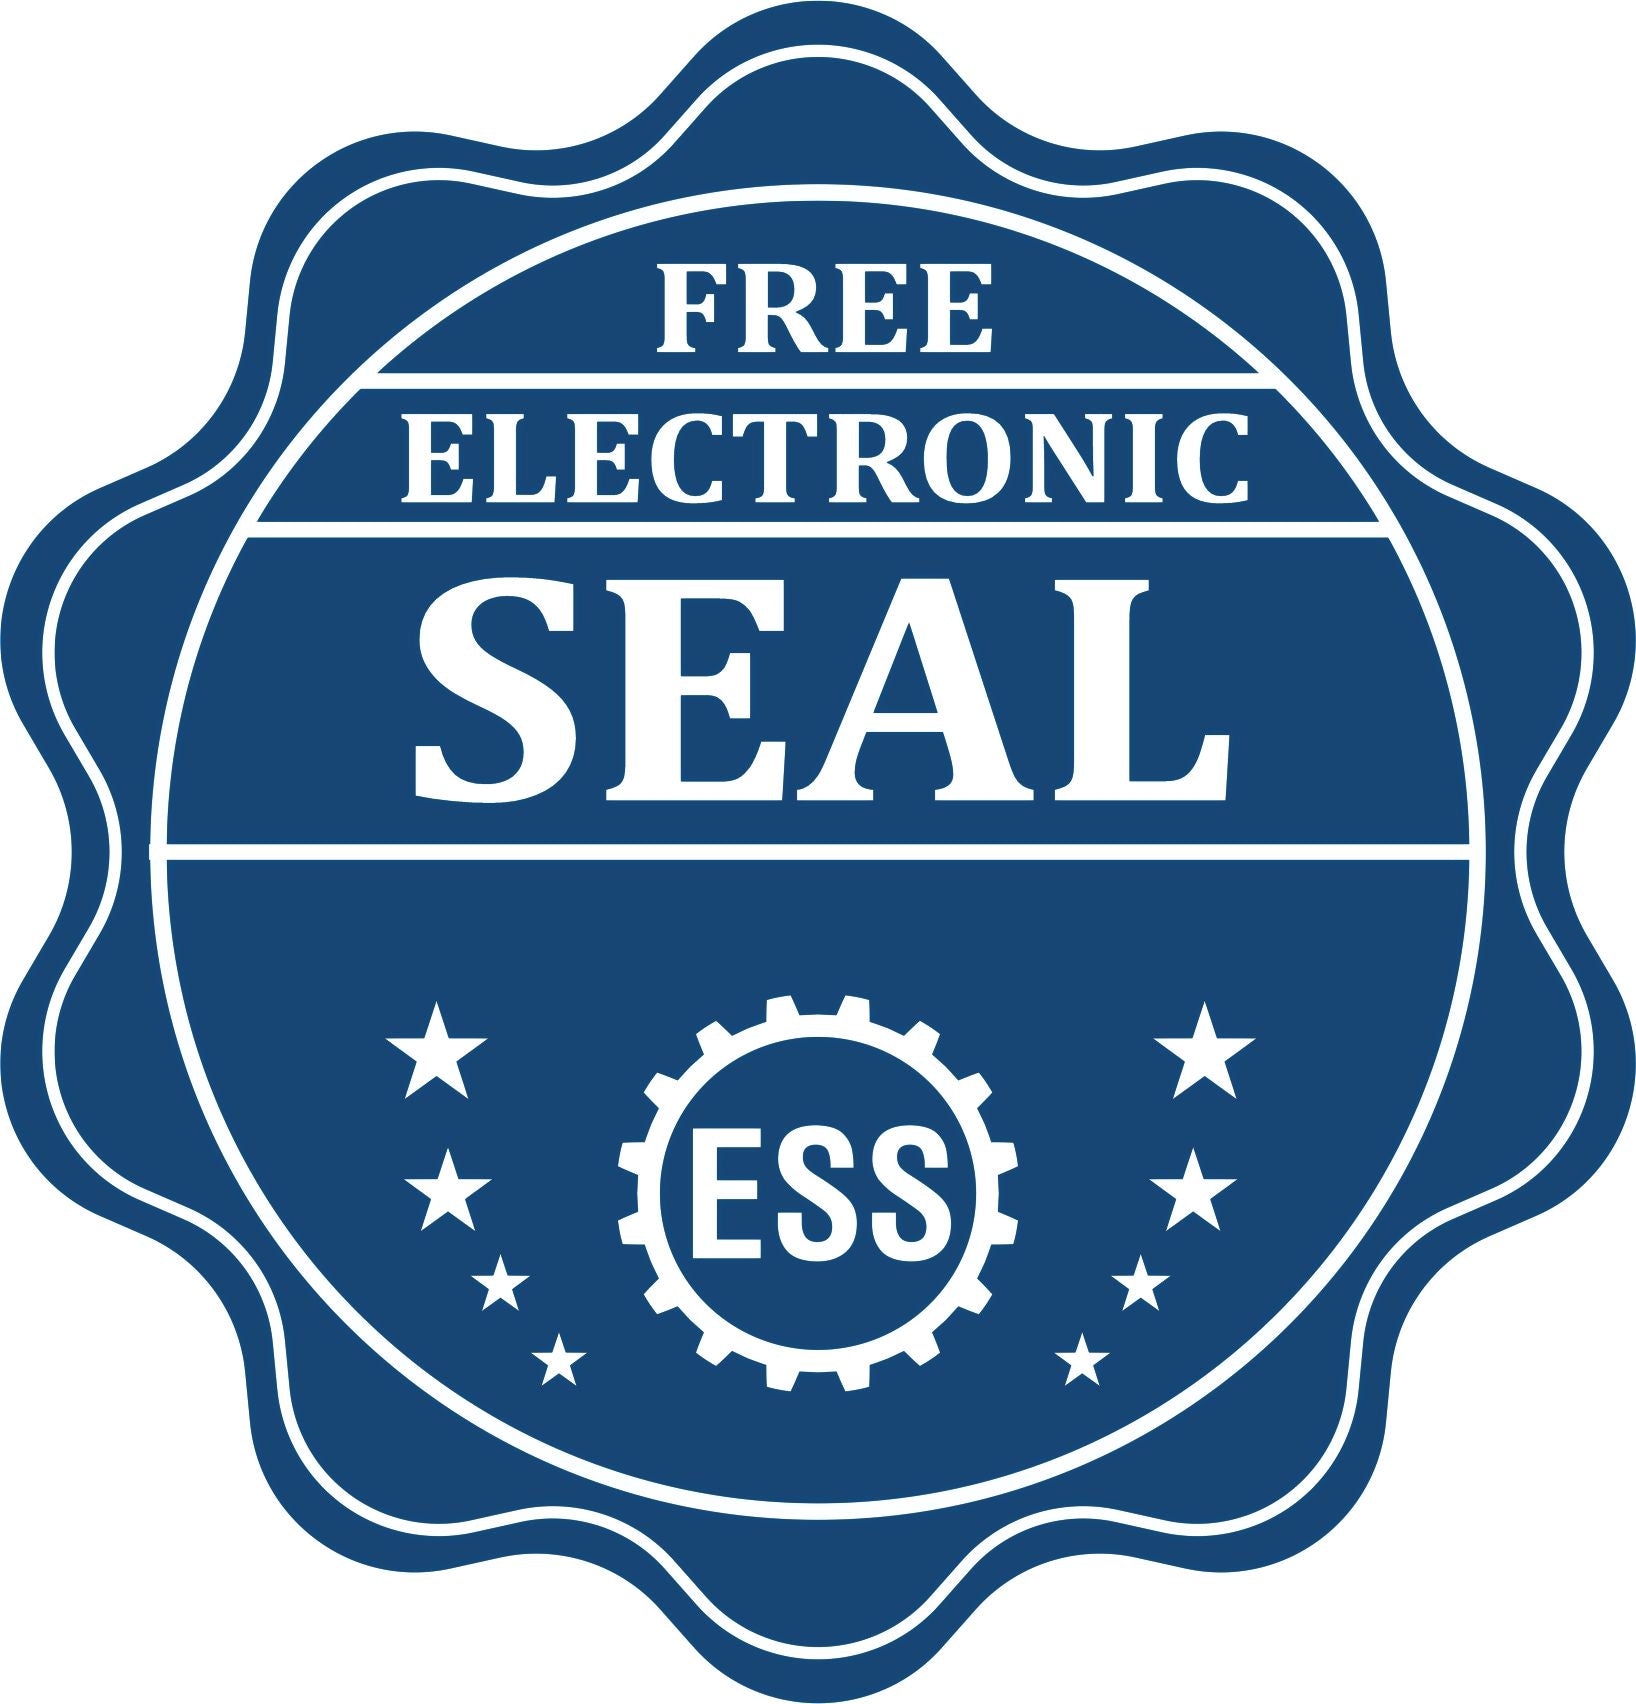 A badge showing a free electronic seal for the Slim Pre-Inked New Mexico Landscape Architect Seal Stamp with stars and the ESS gear on the emblem.